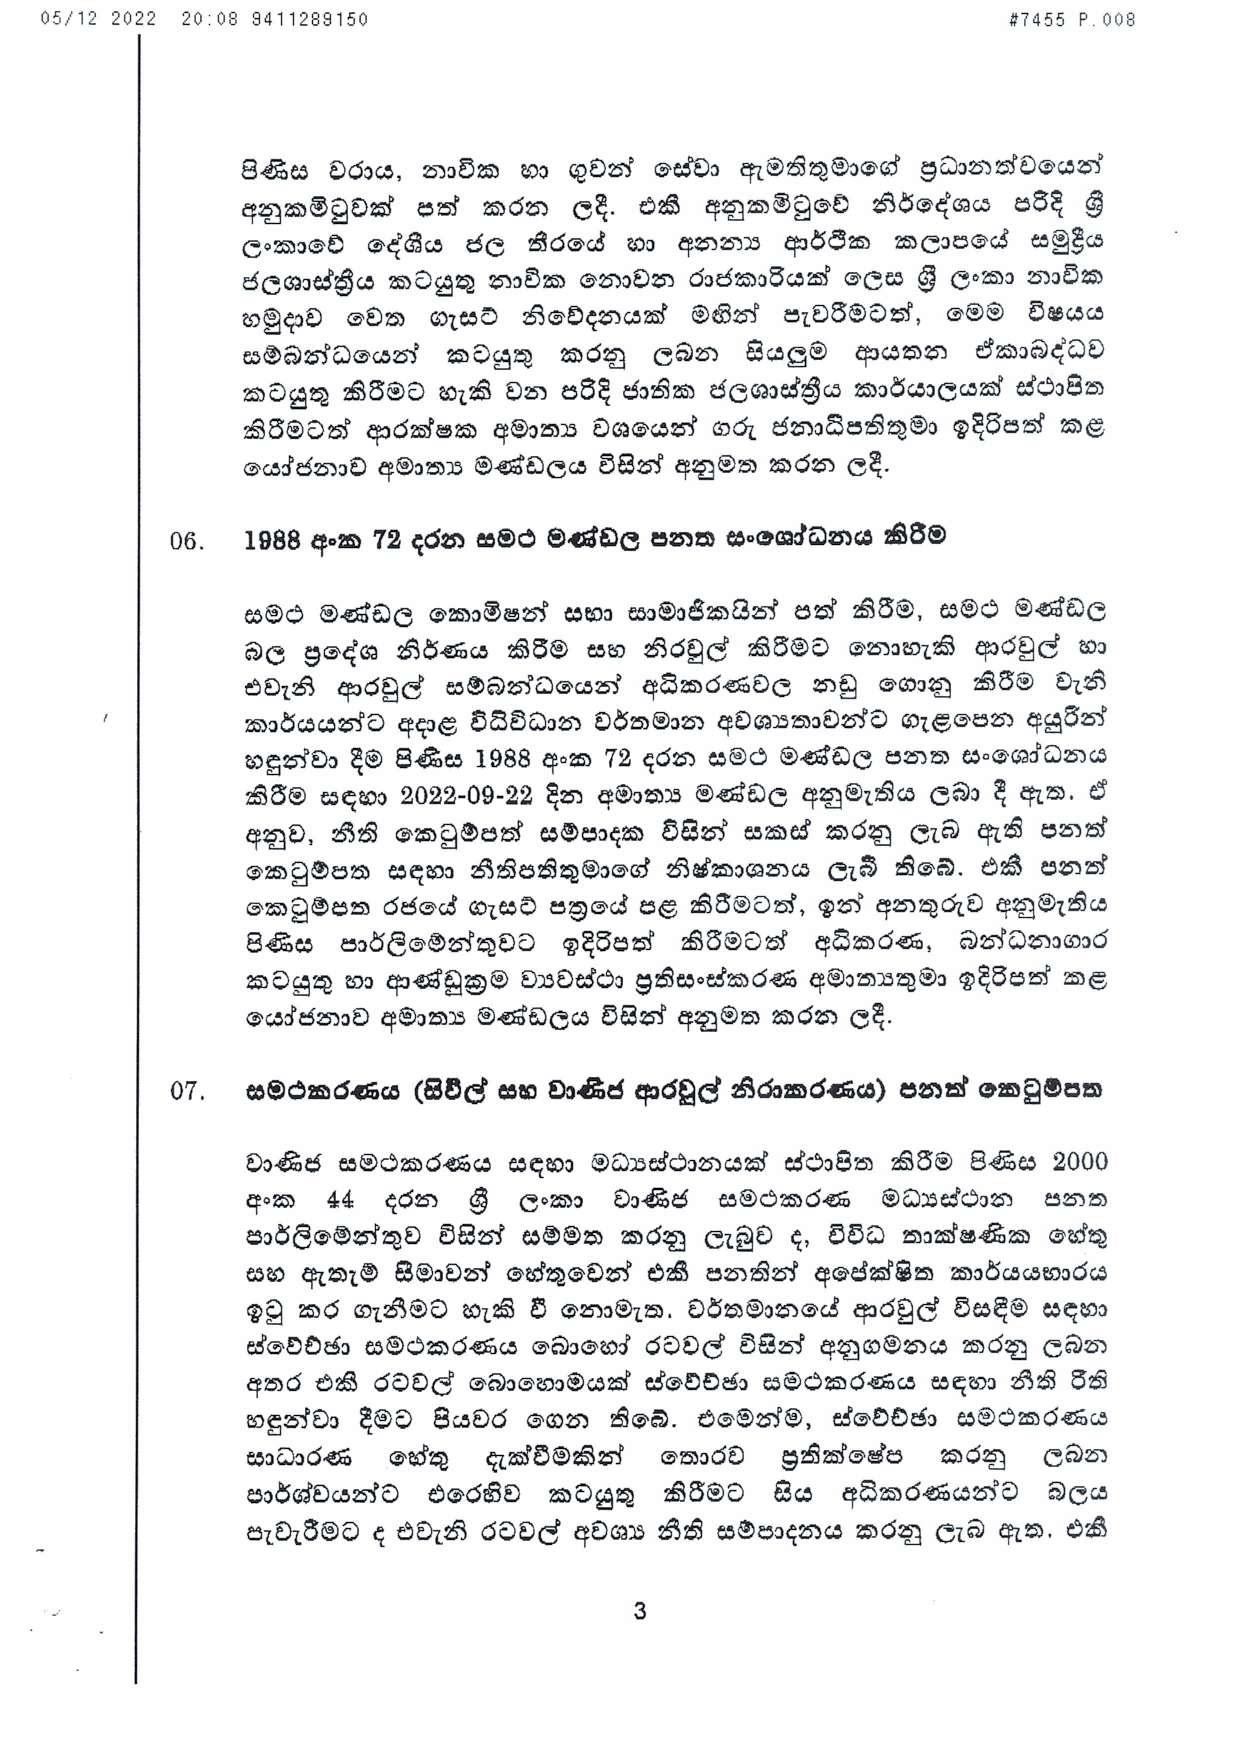 Cabinet Decisions on 05.12.2022 page 003